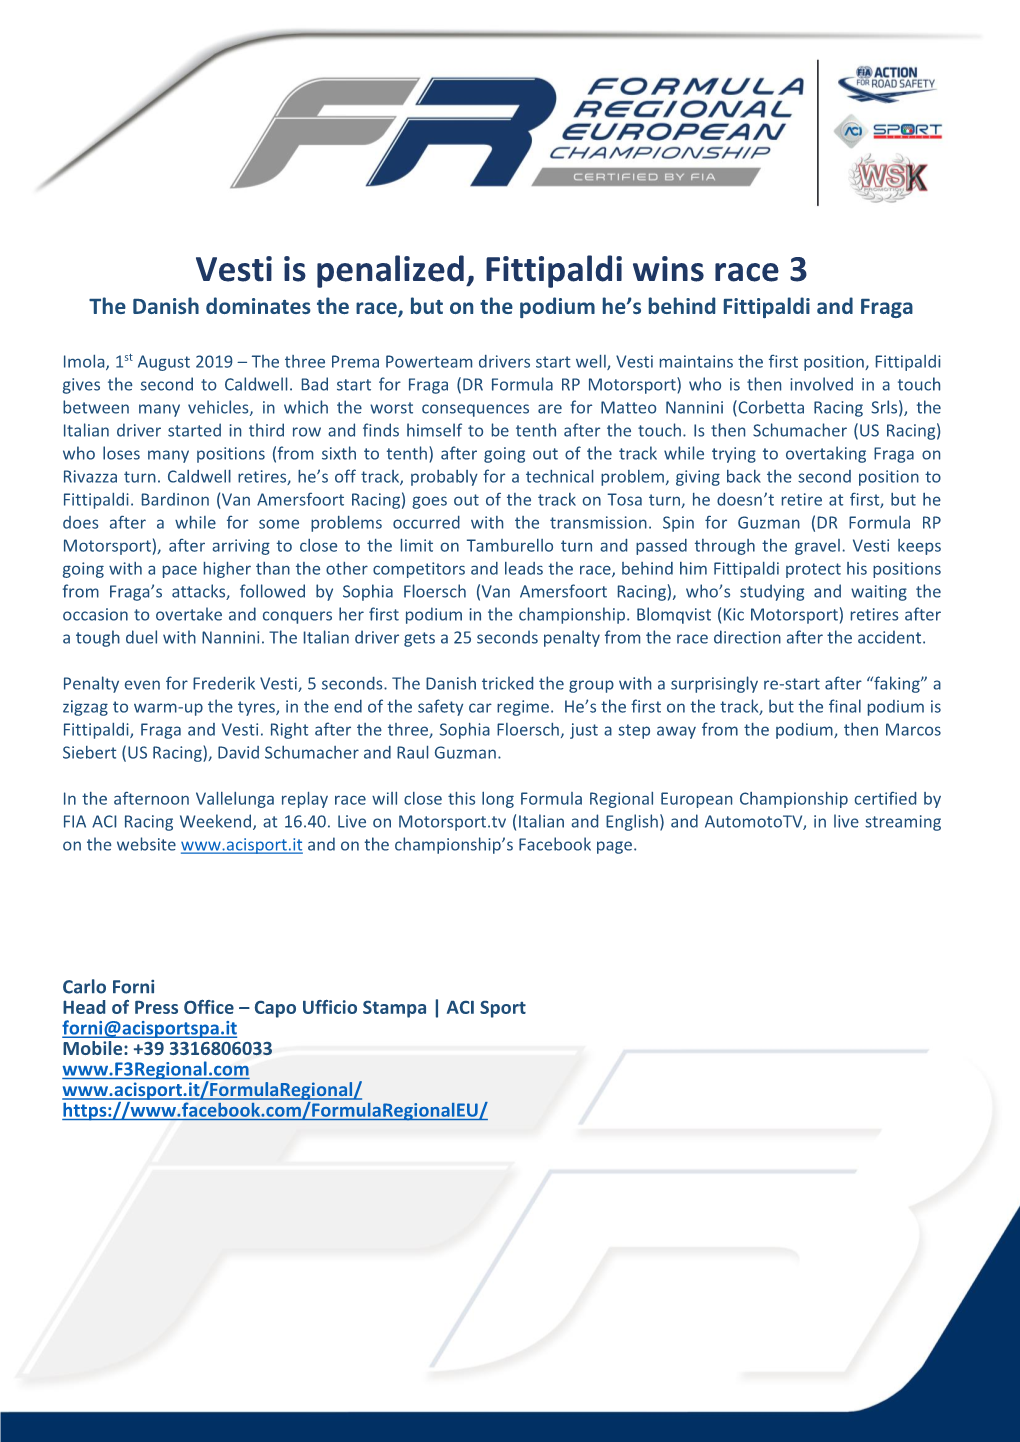 Vesti Is Penalized, Fittipaldi Wins Race 3 the Danish Dominates the Race, but on the Podium He’S Behind Fittipaldi and Fraga